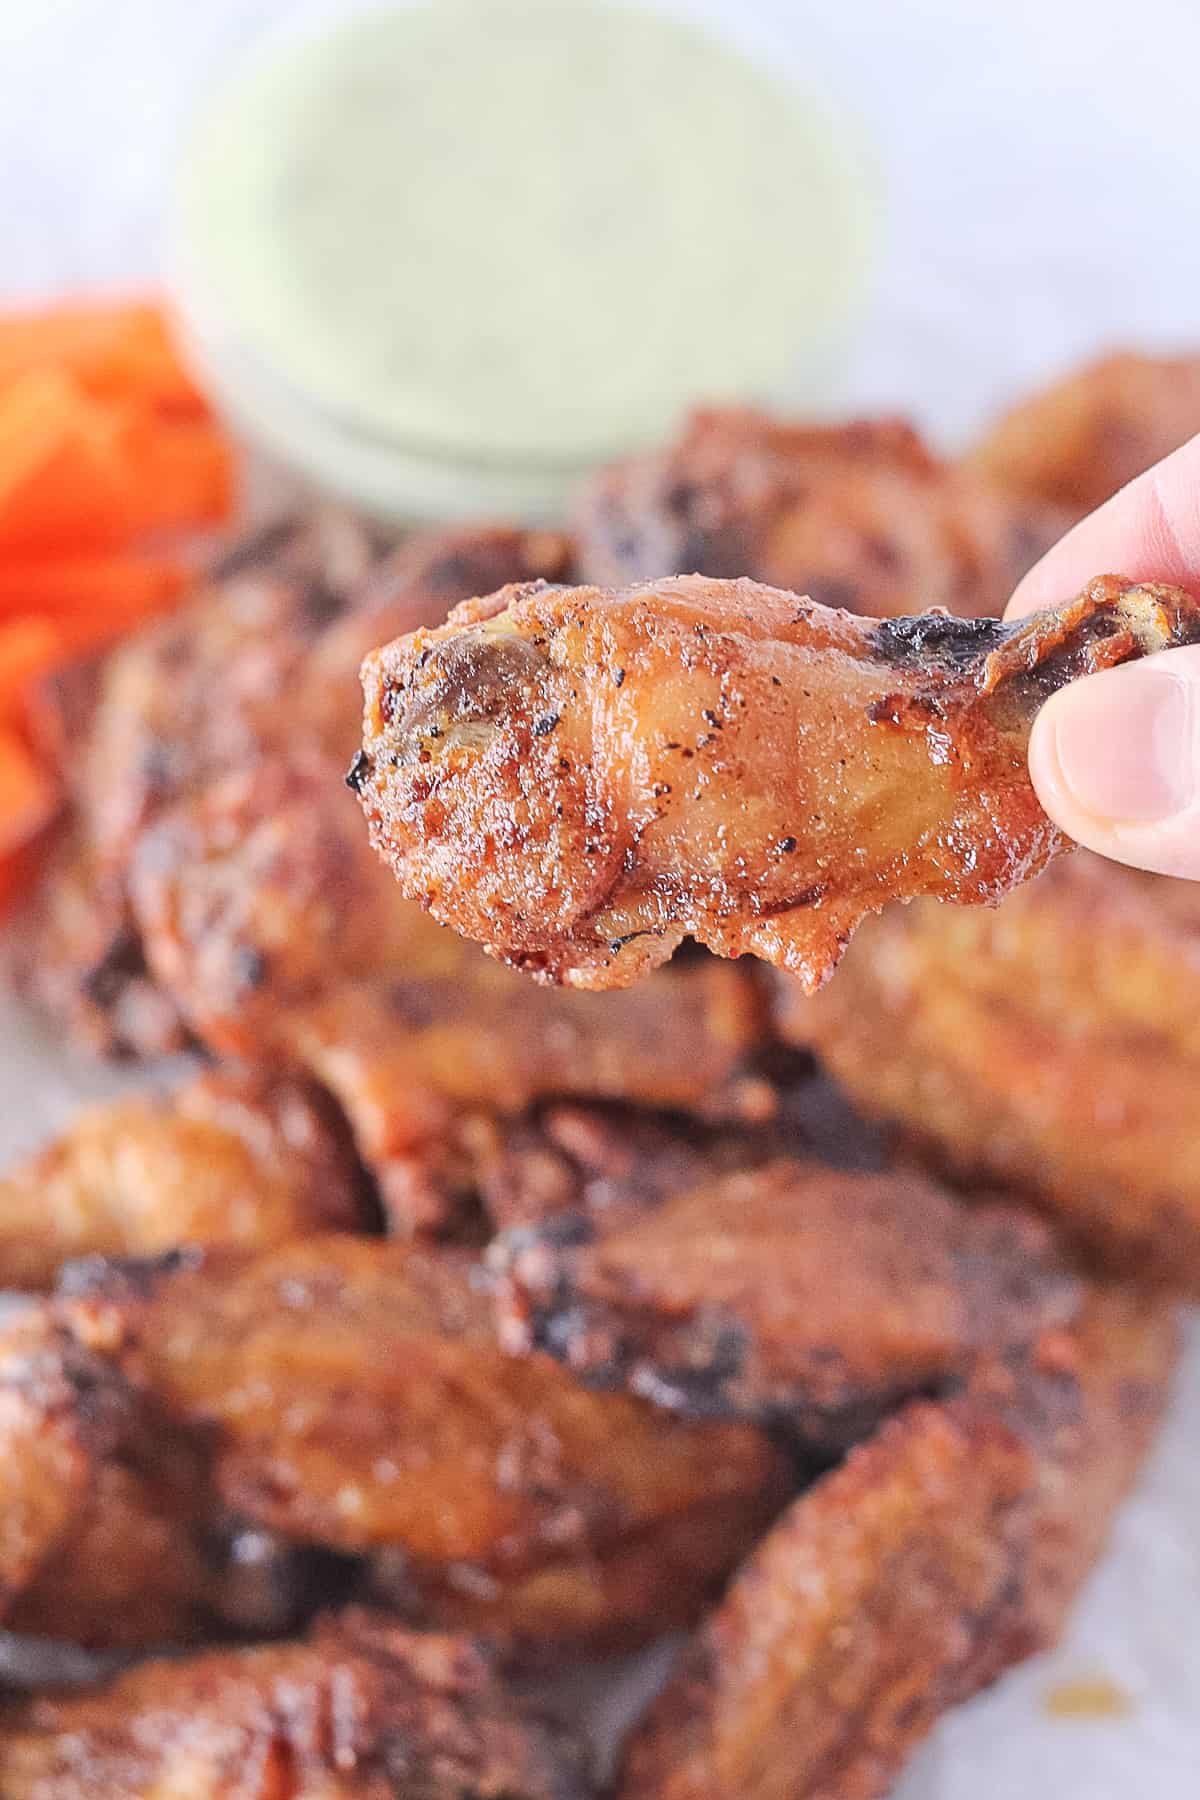 Fingers picking up one baked crispy whole30 chicken wing.